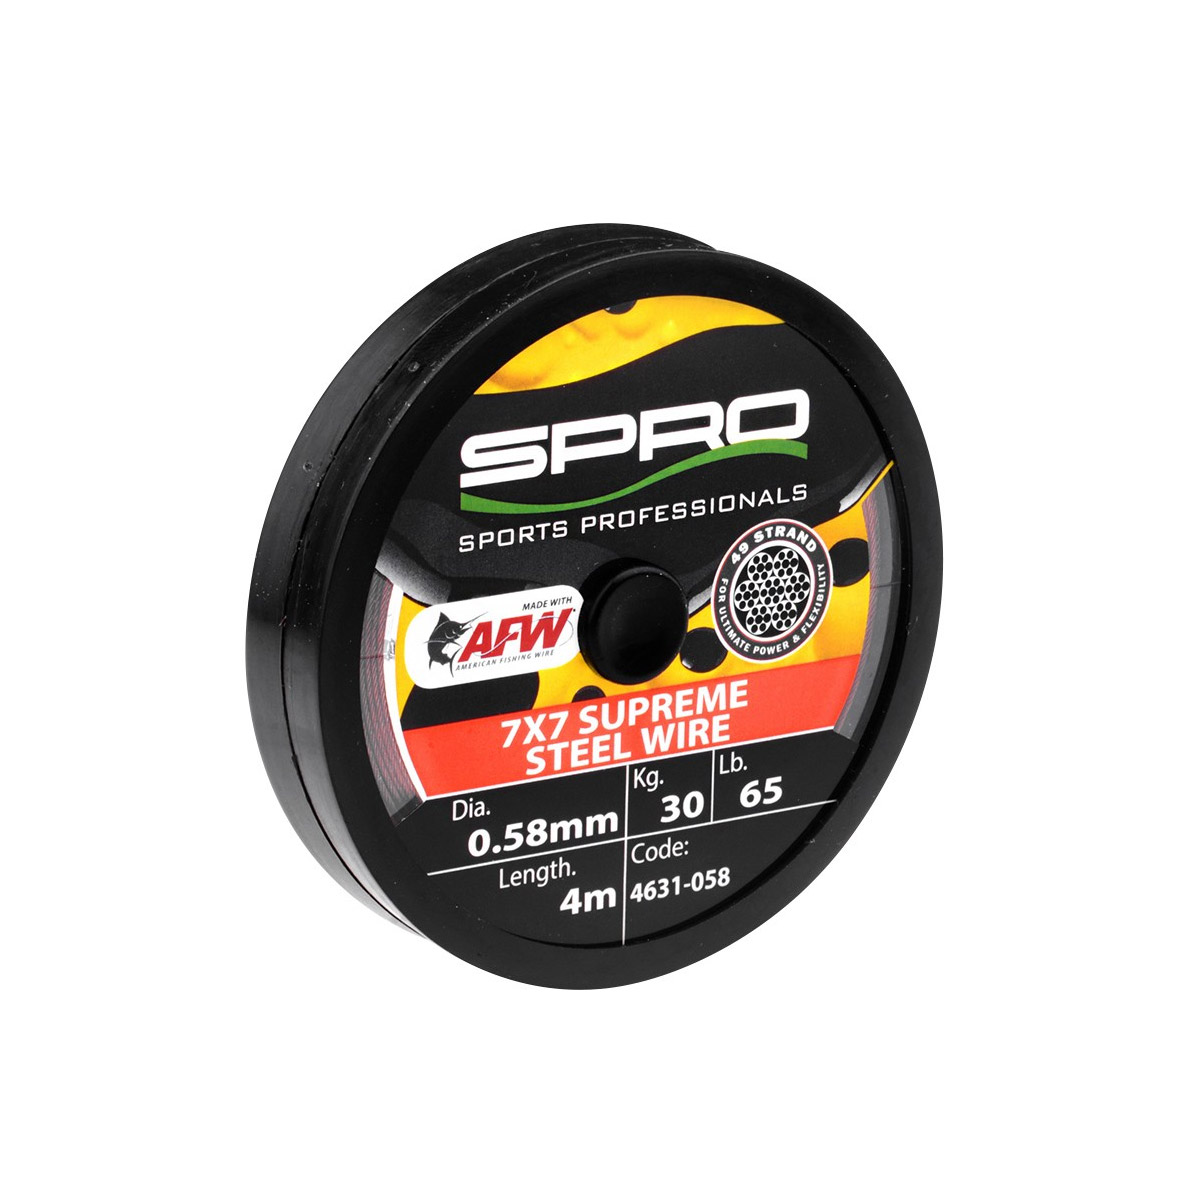 Spro AFW 7x7 Supreme Steel Wire